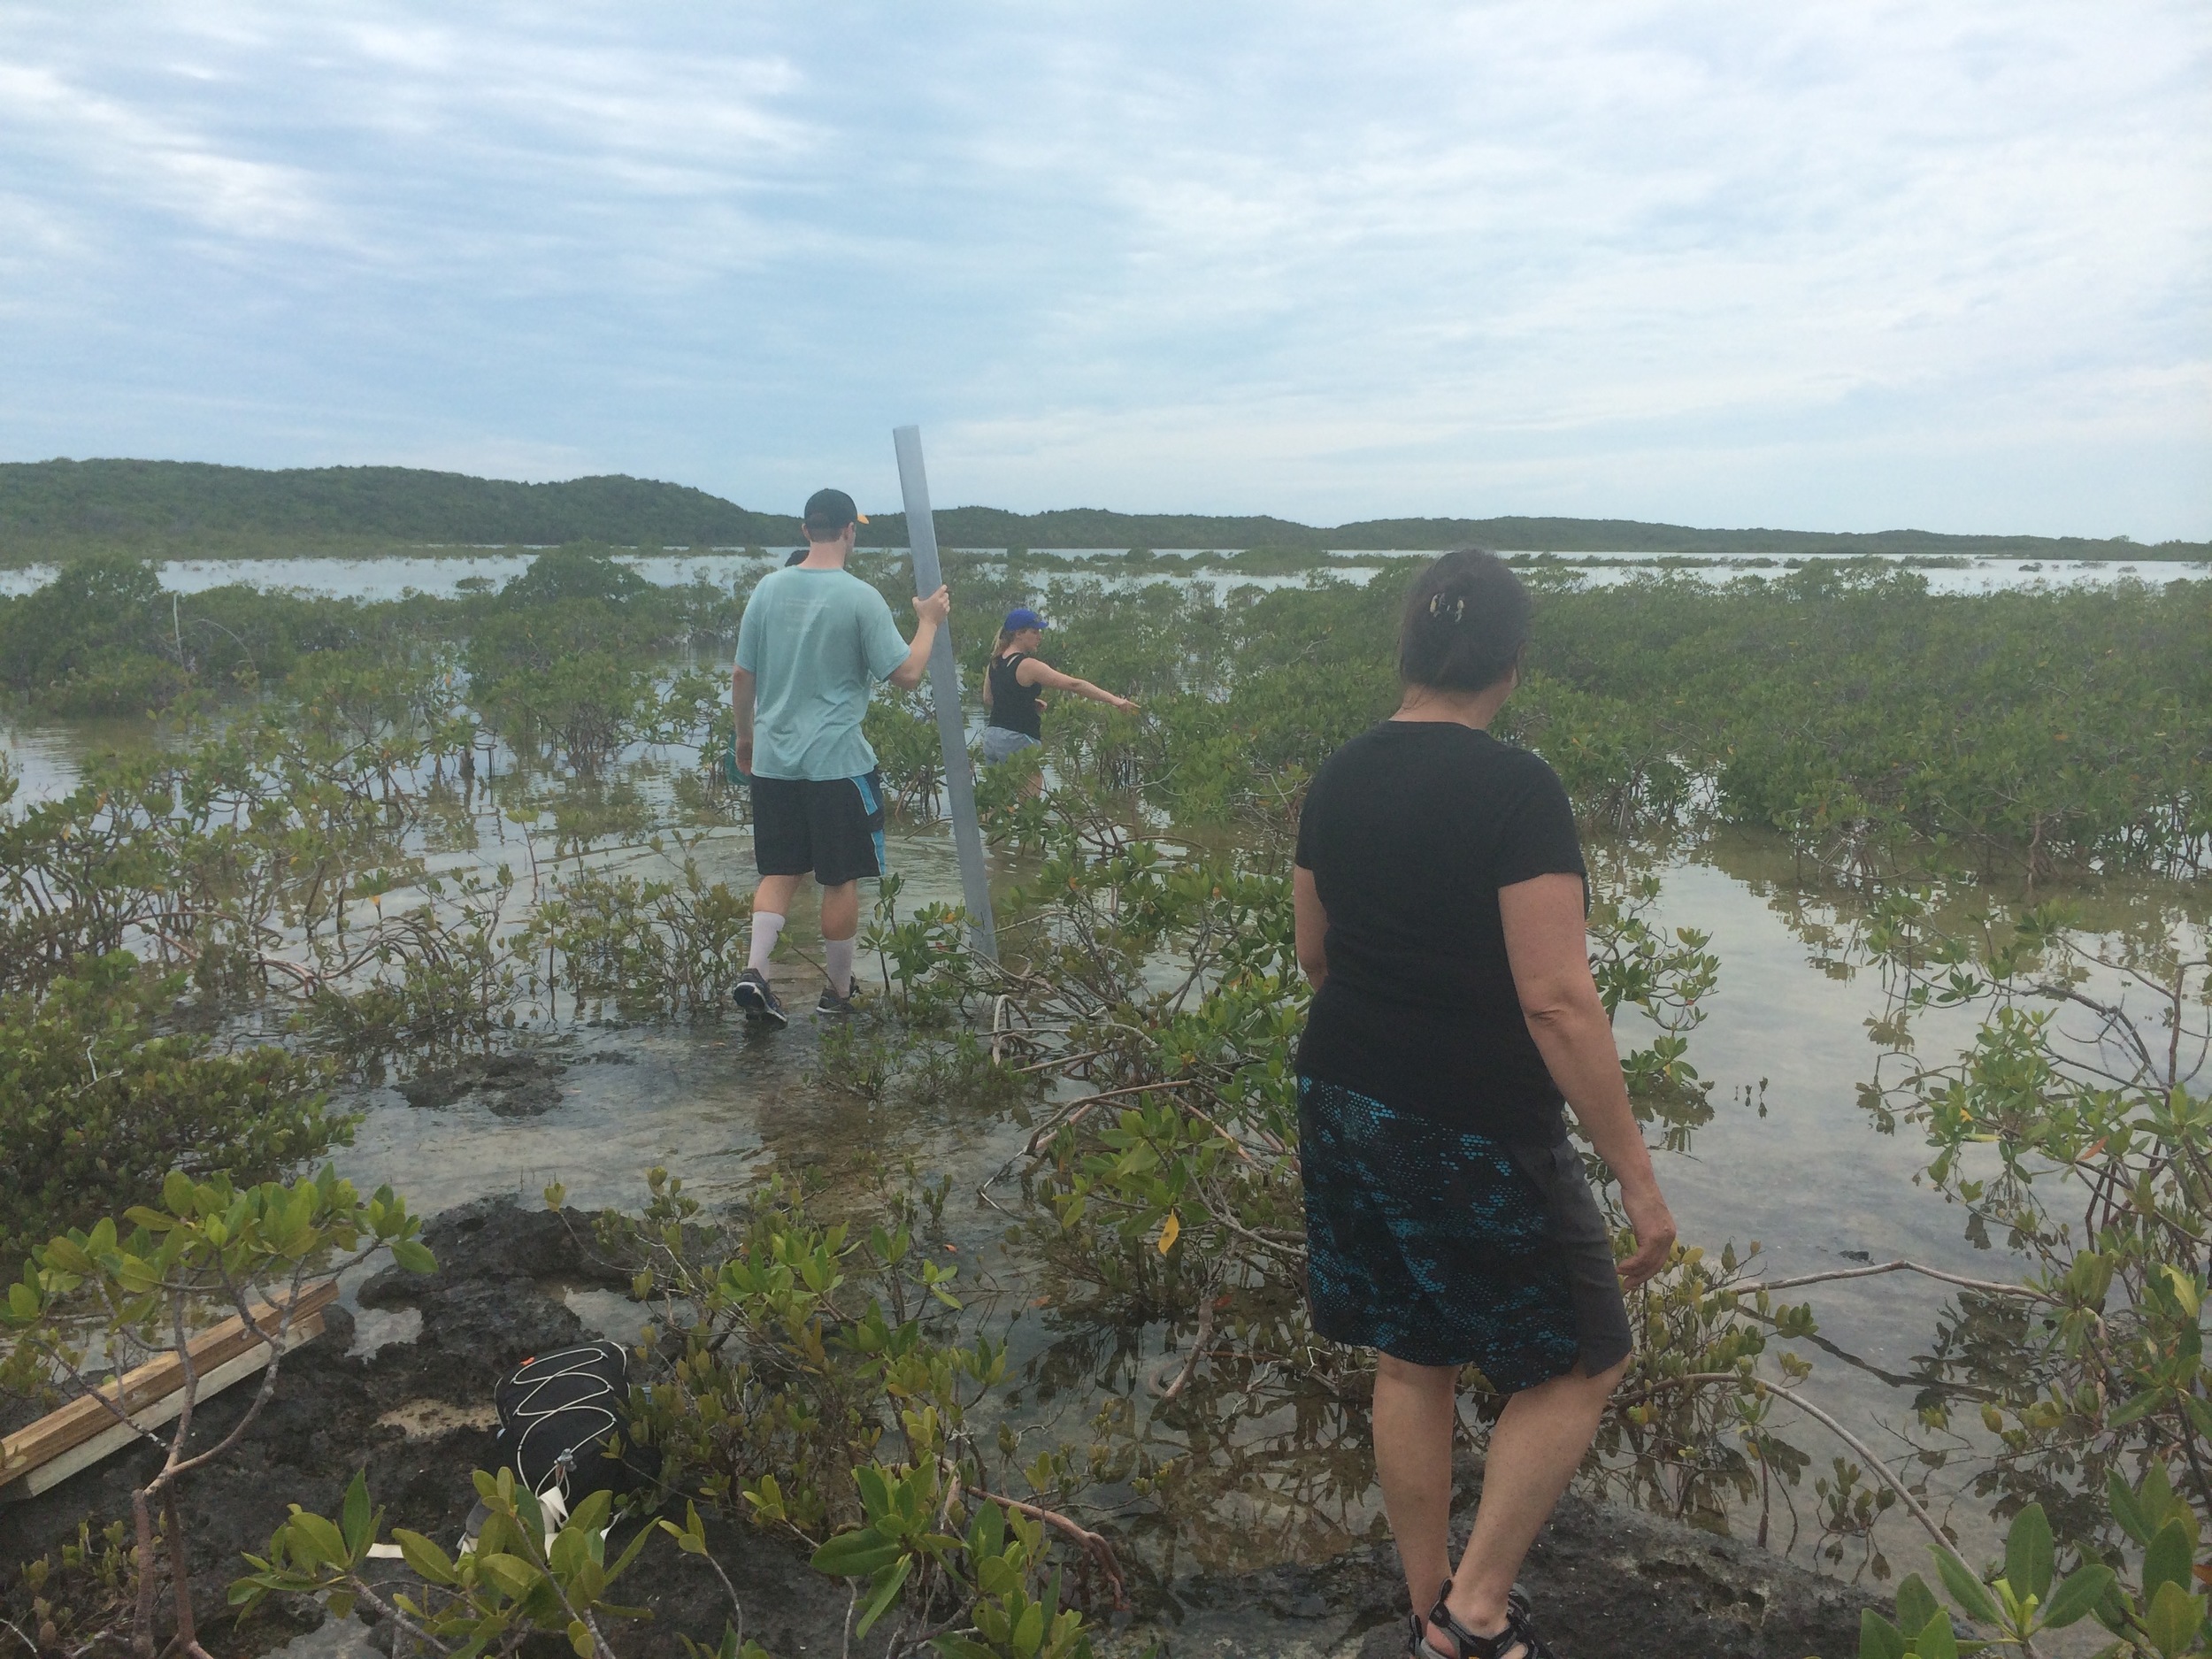 Sediment coring in a mangrove swamp in the Bahamas.